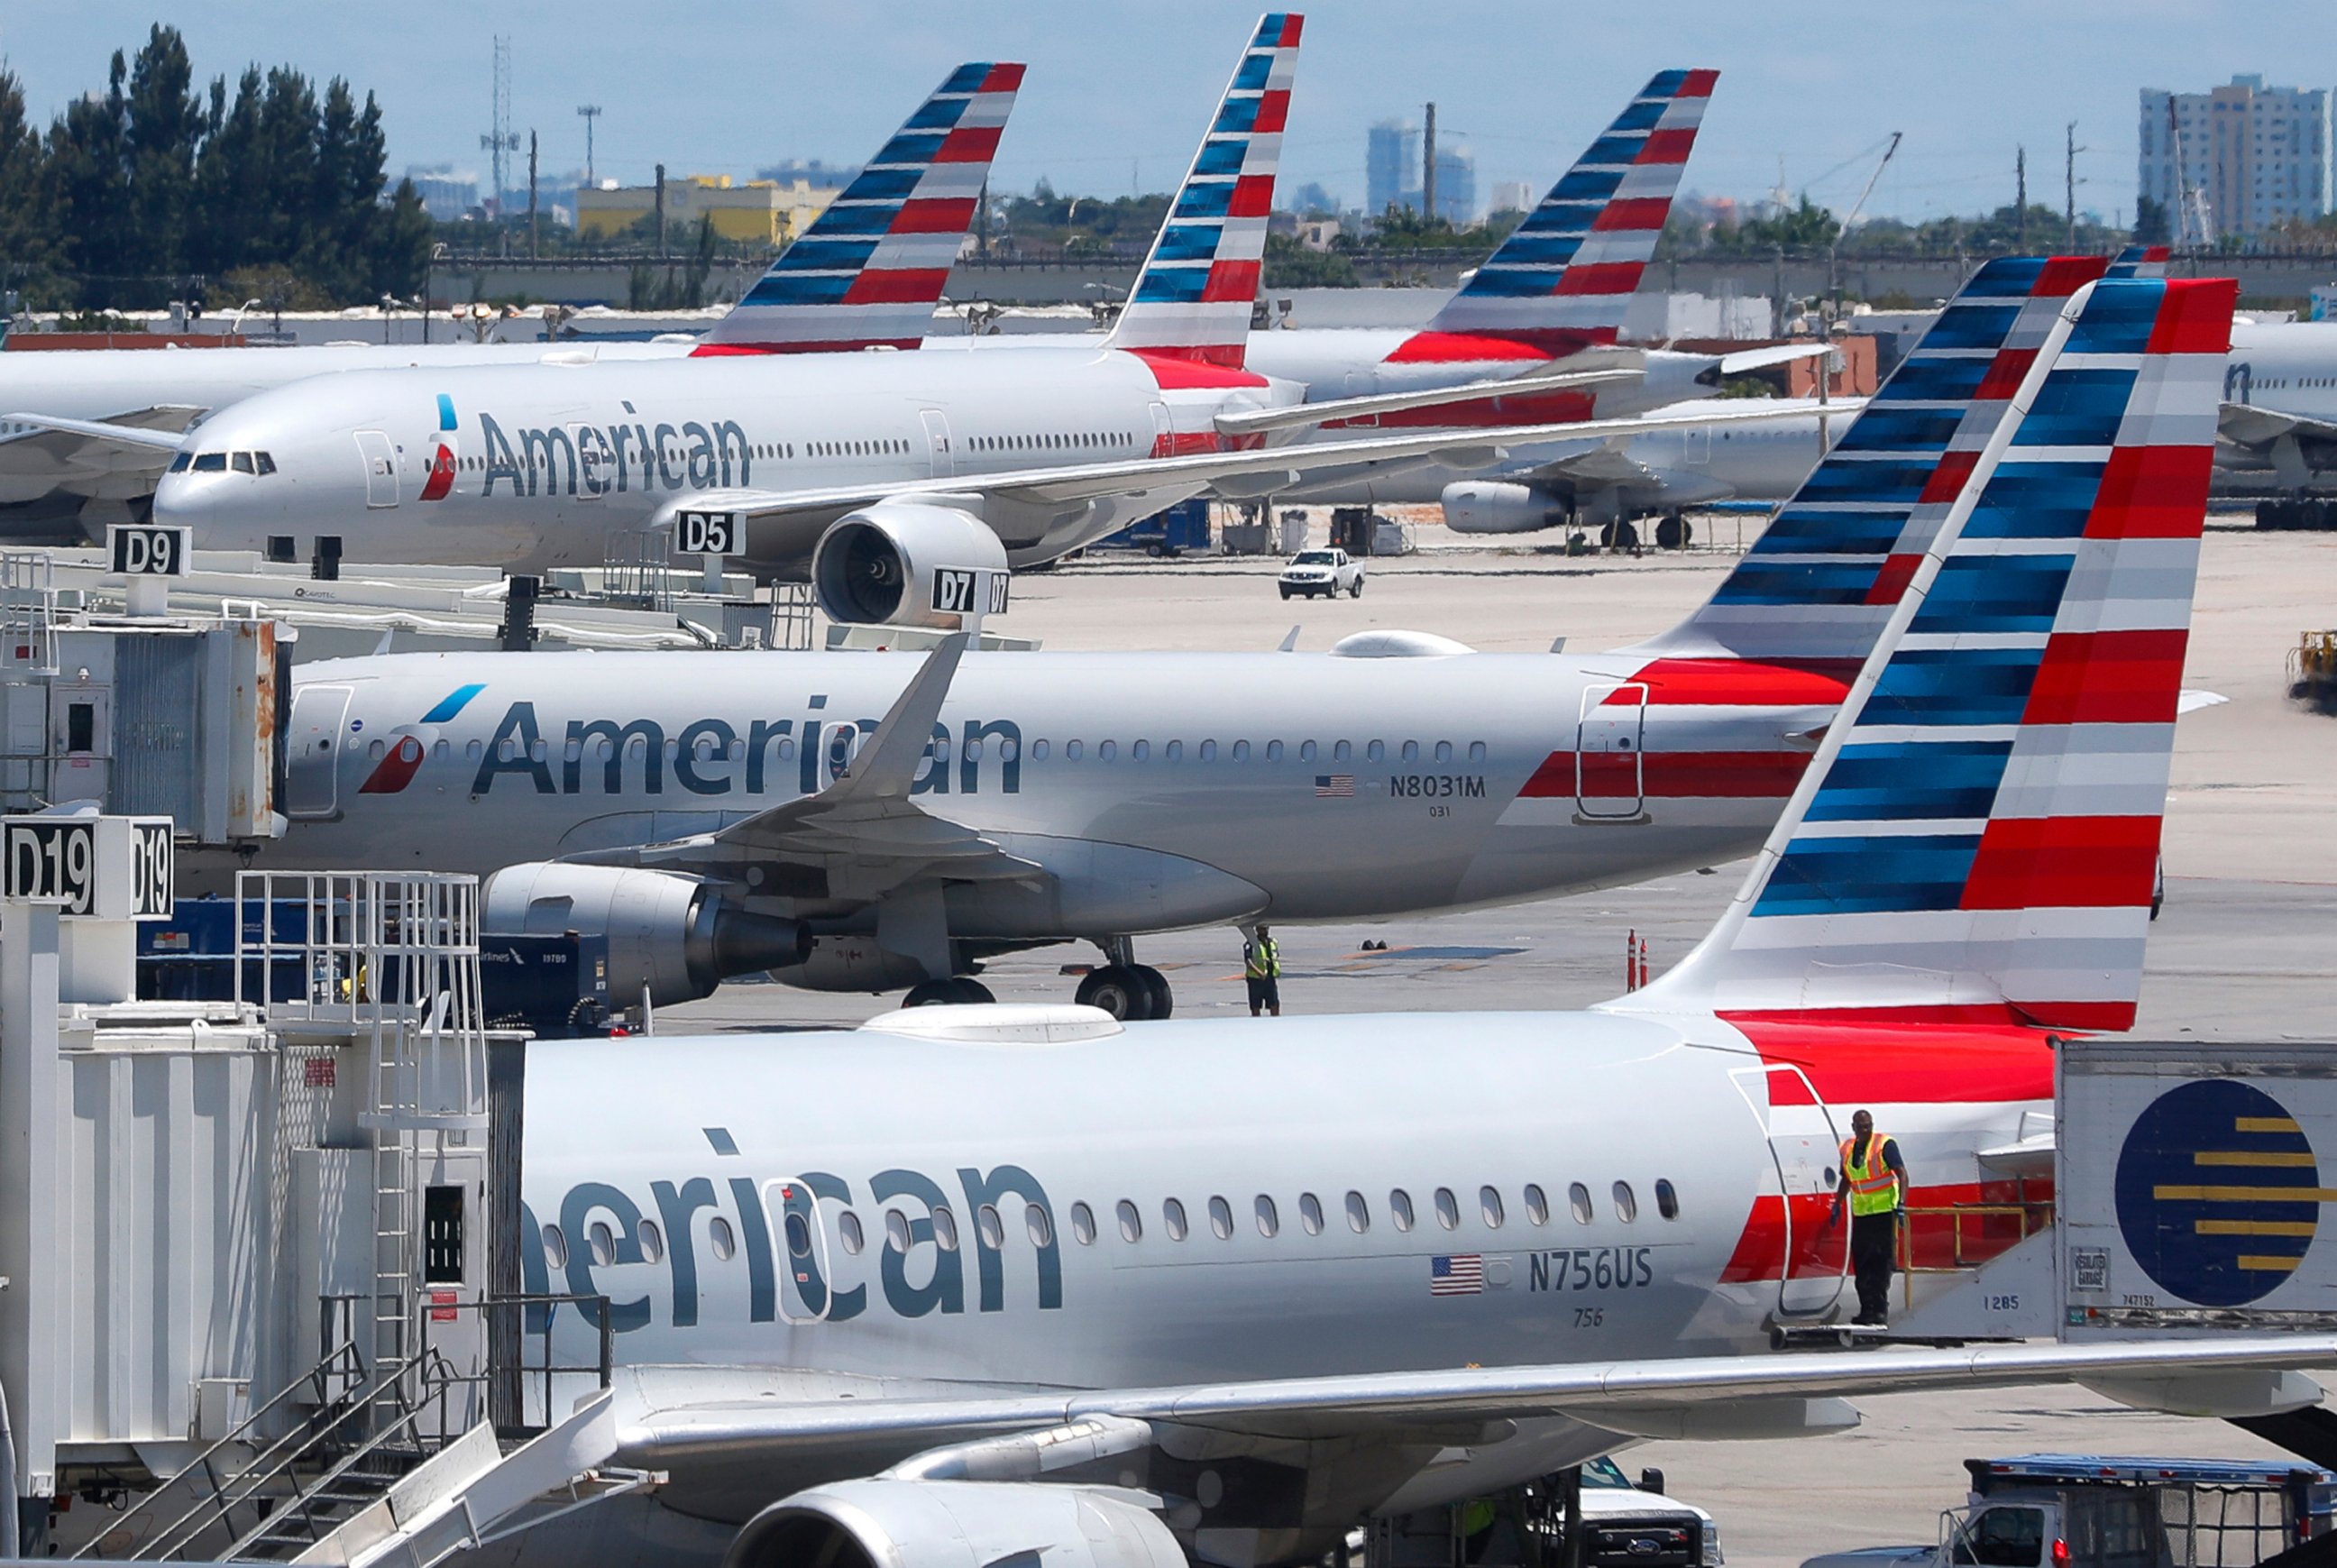 PHOTO: In this April 24, 2019, photo, American Airlines aircraft are shown parked at their gates at Miami International Airport in Miami.